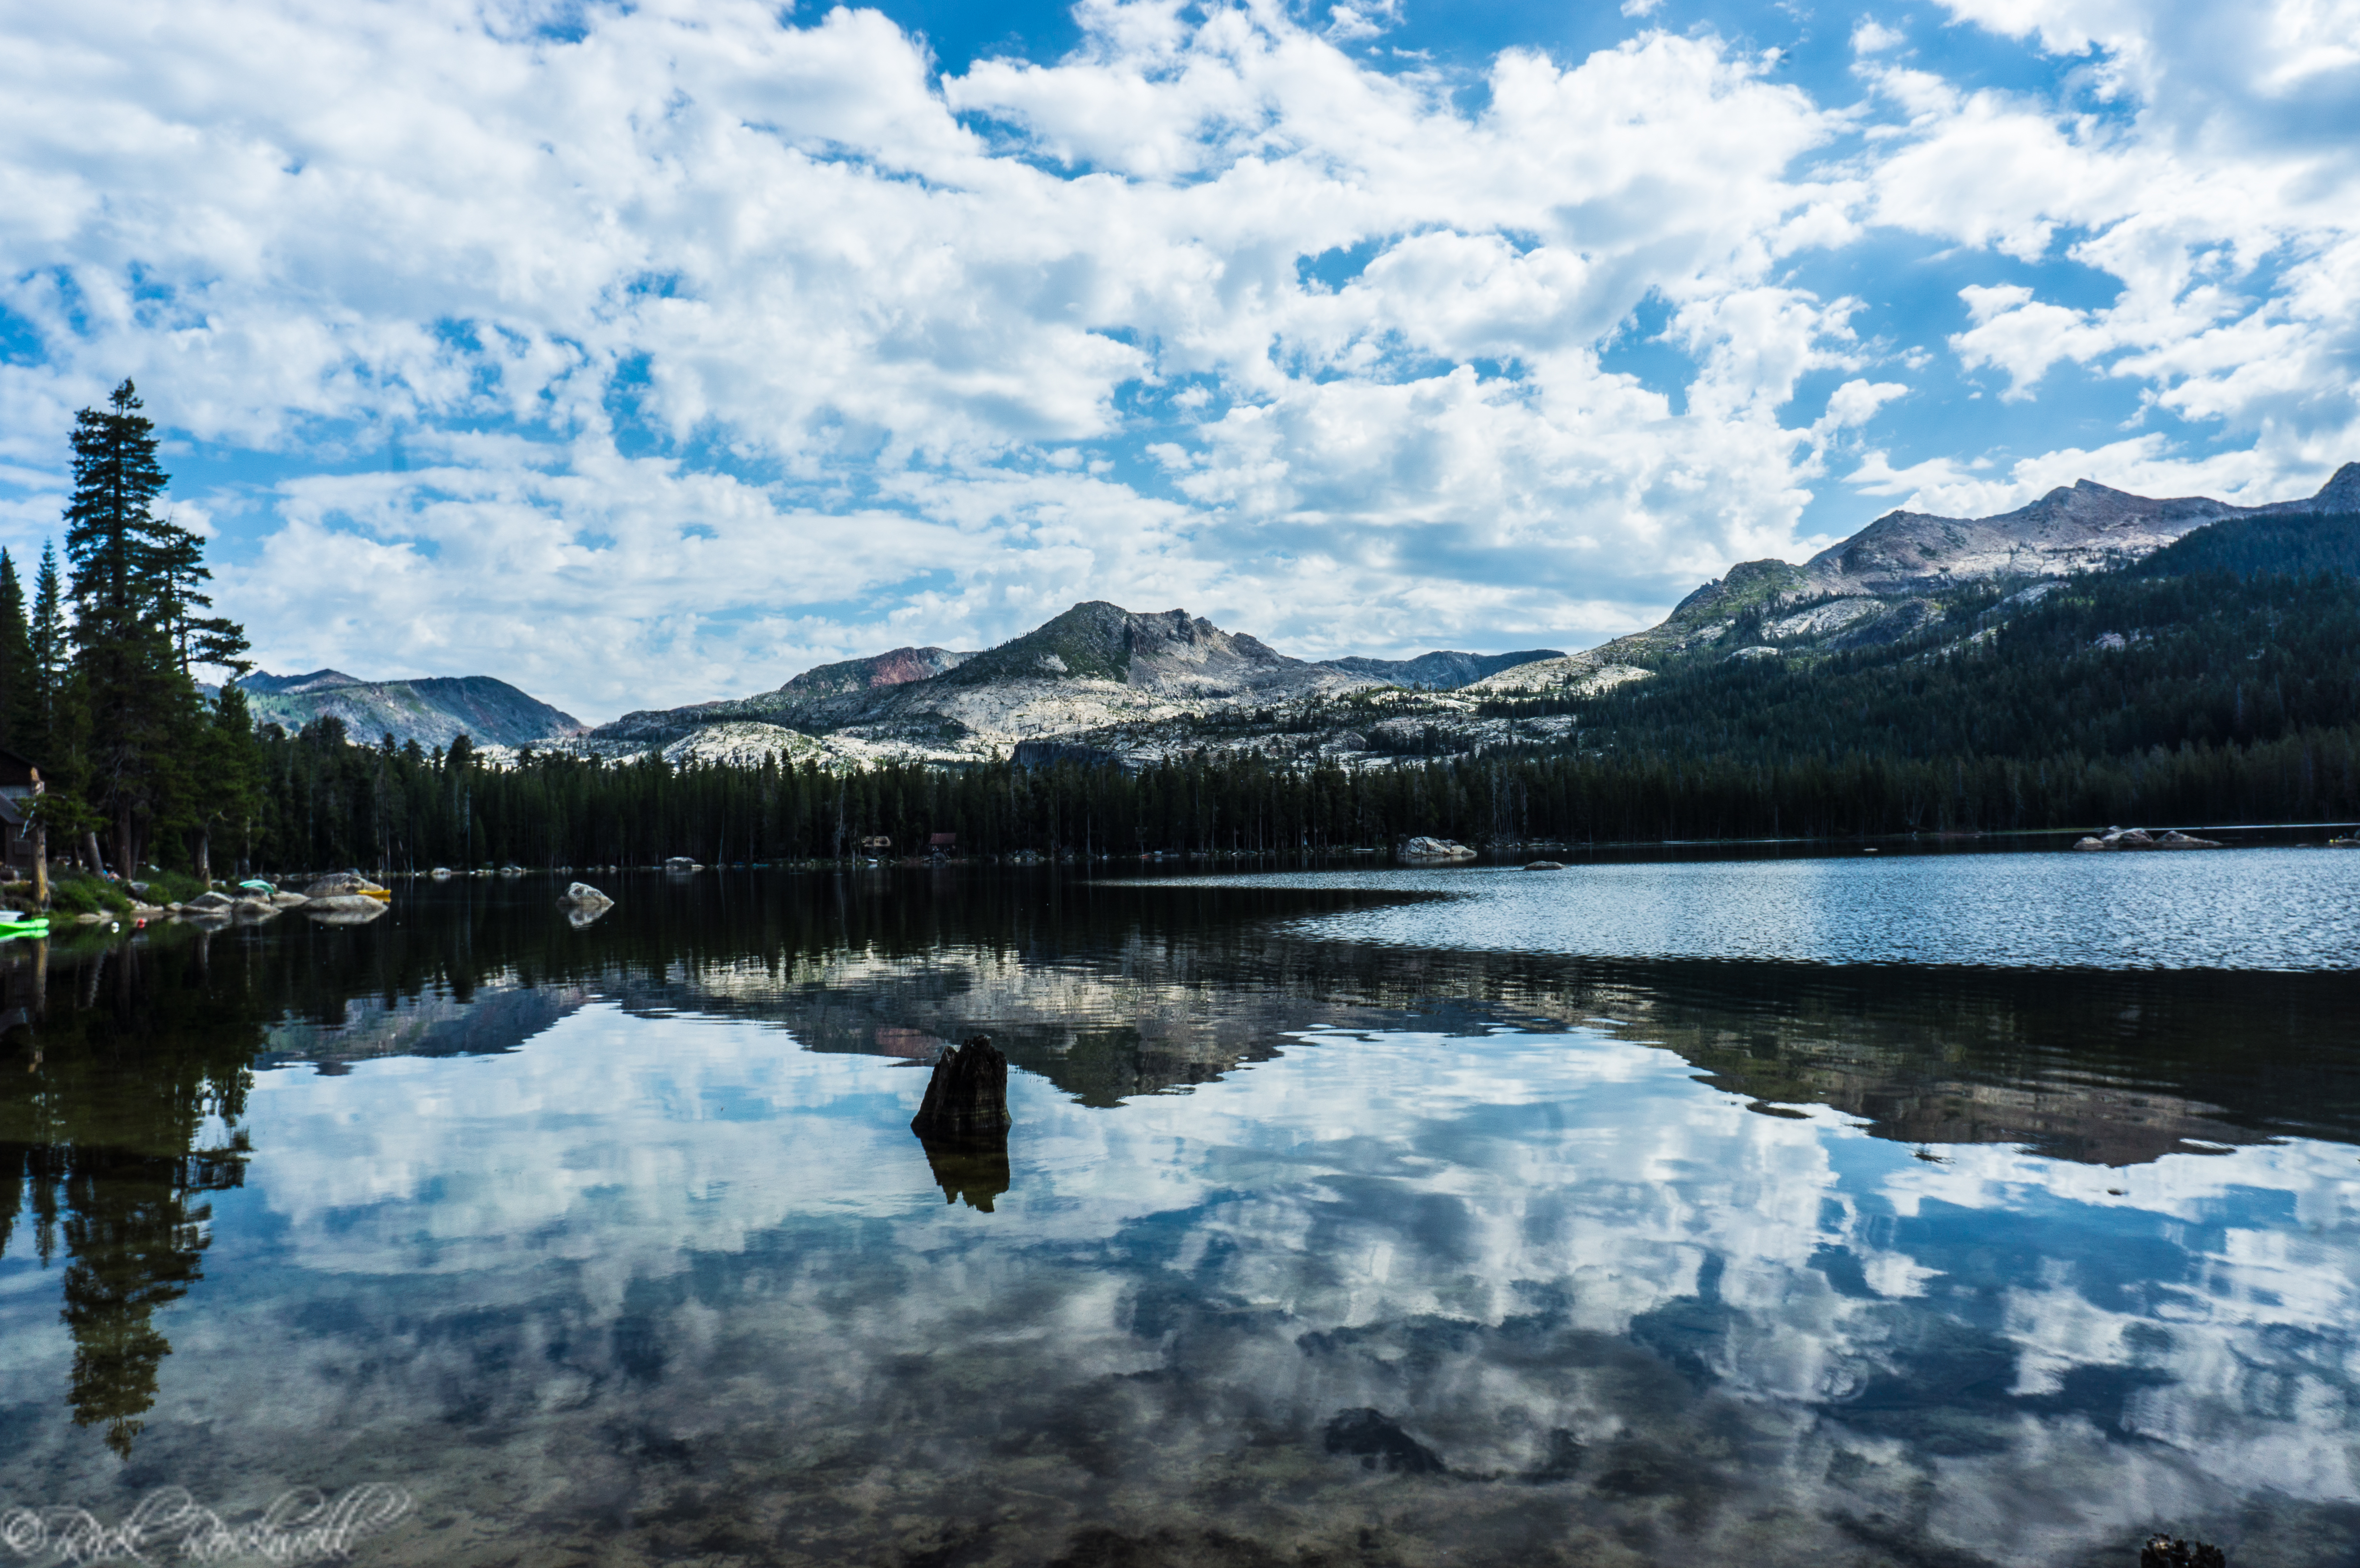 Photo of Wrights Lake is the right choice for hiking, kayaking, camping and scenery